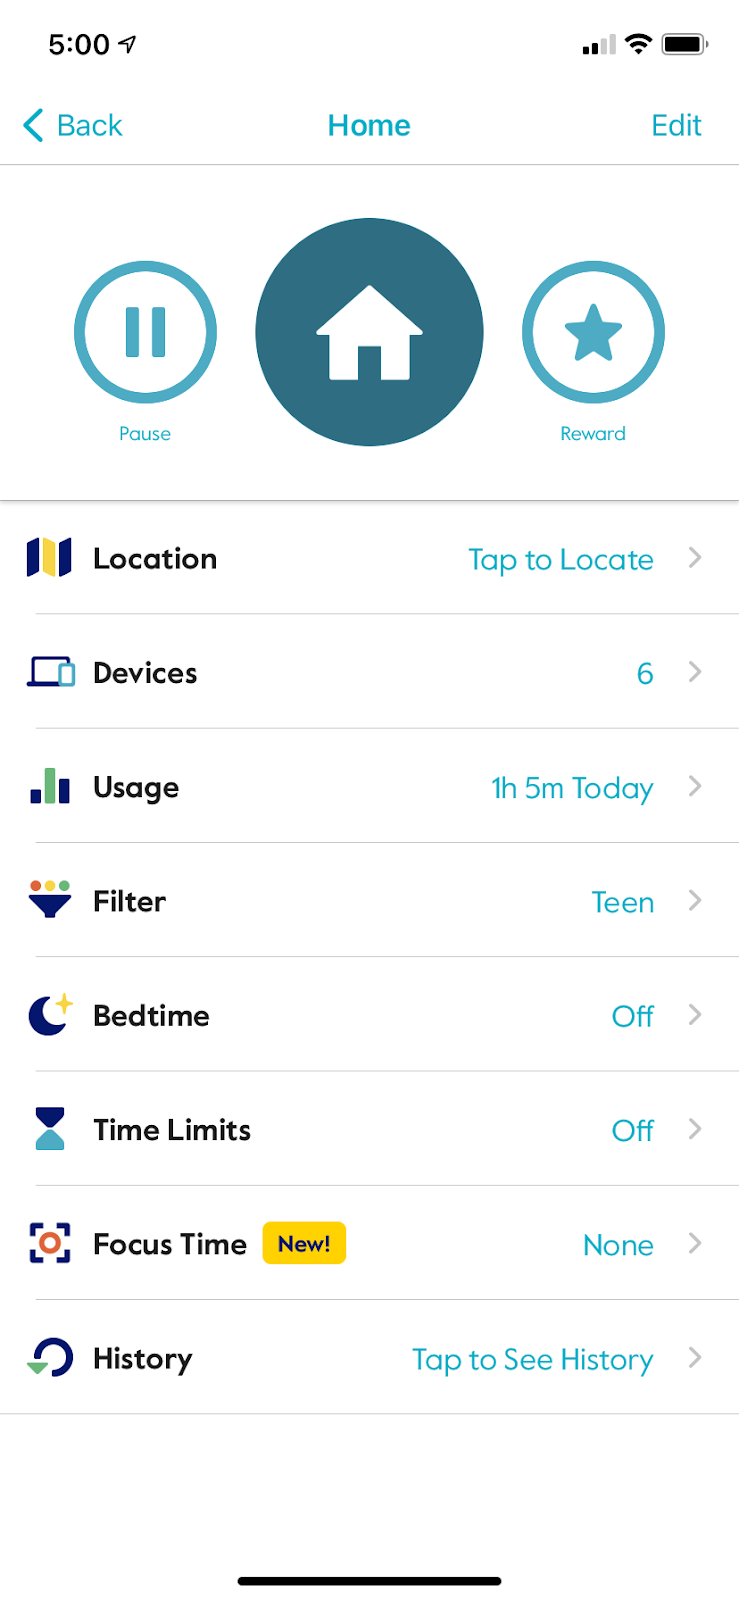 screenshot from circle app showing additional settings like location, number of devices connected, usage time, filters, bedtime settings, time limits, and focus time